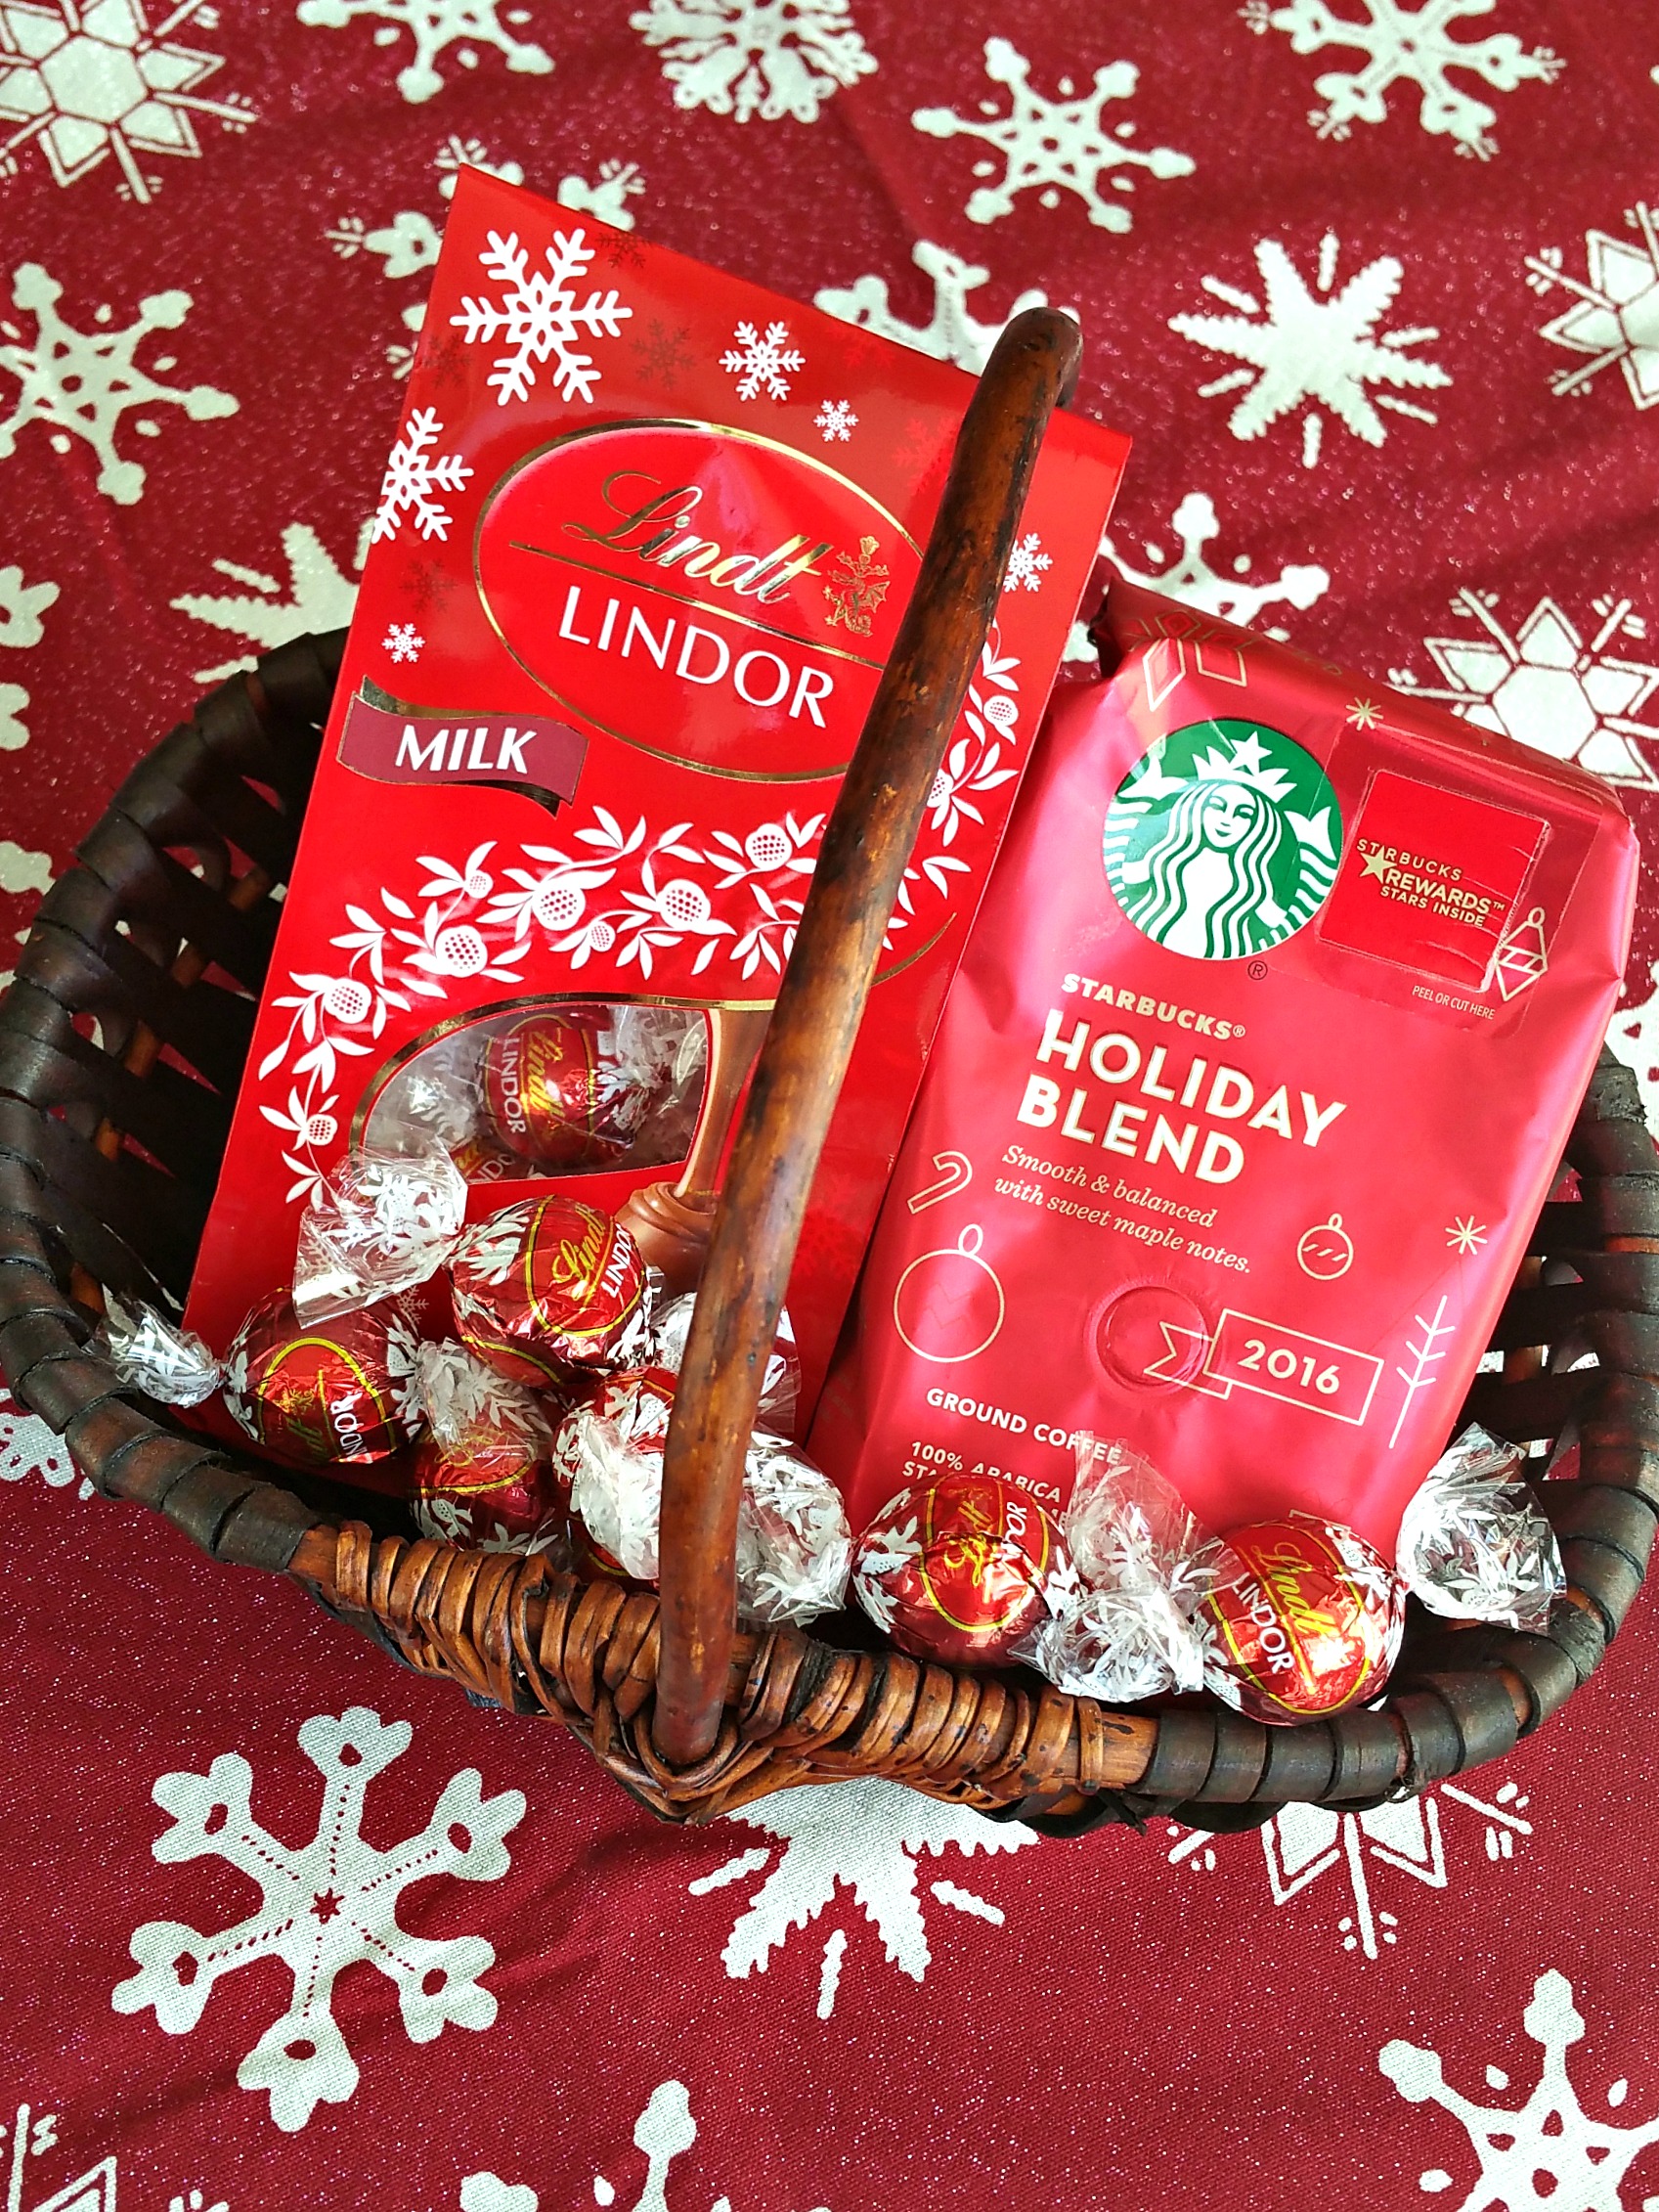 starbucks-and-lindt-at-target